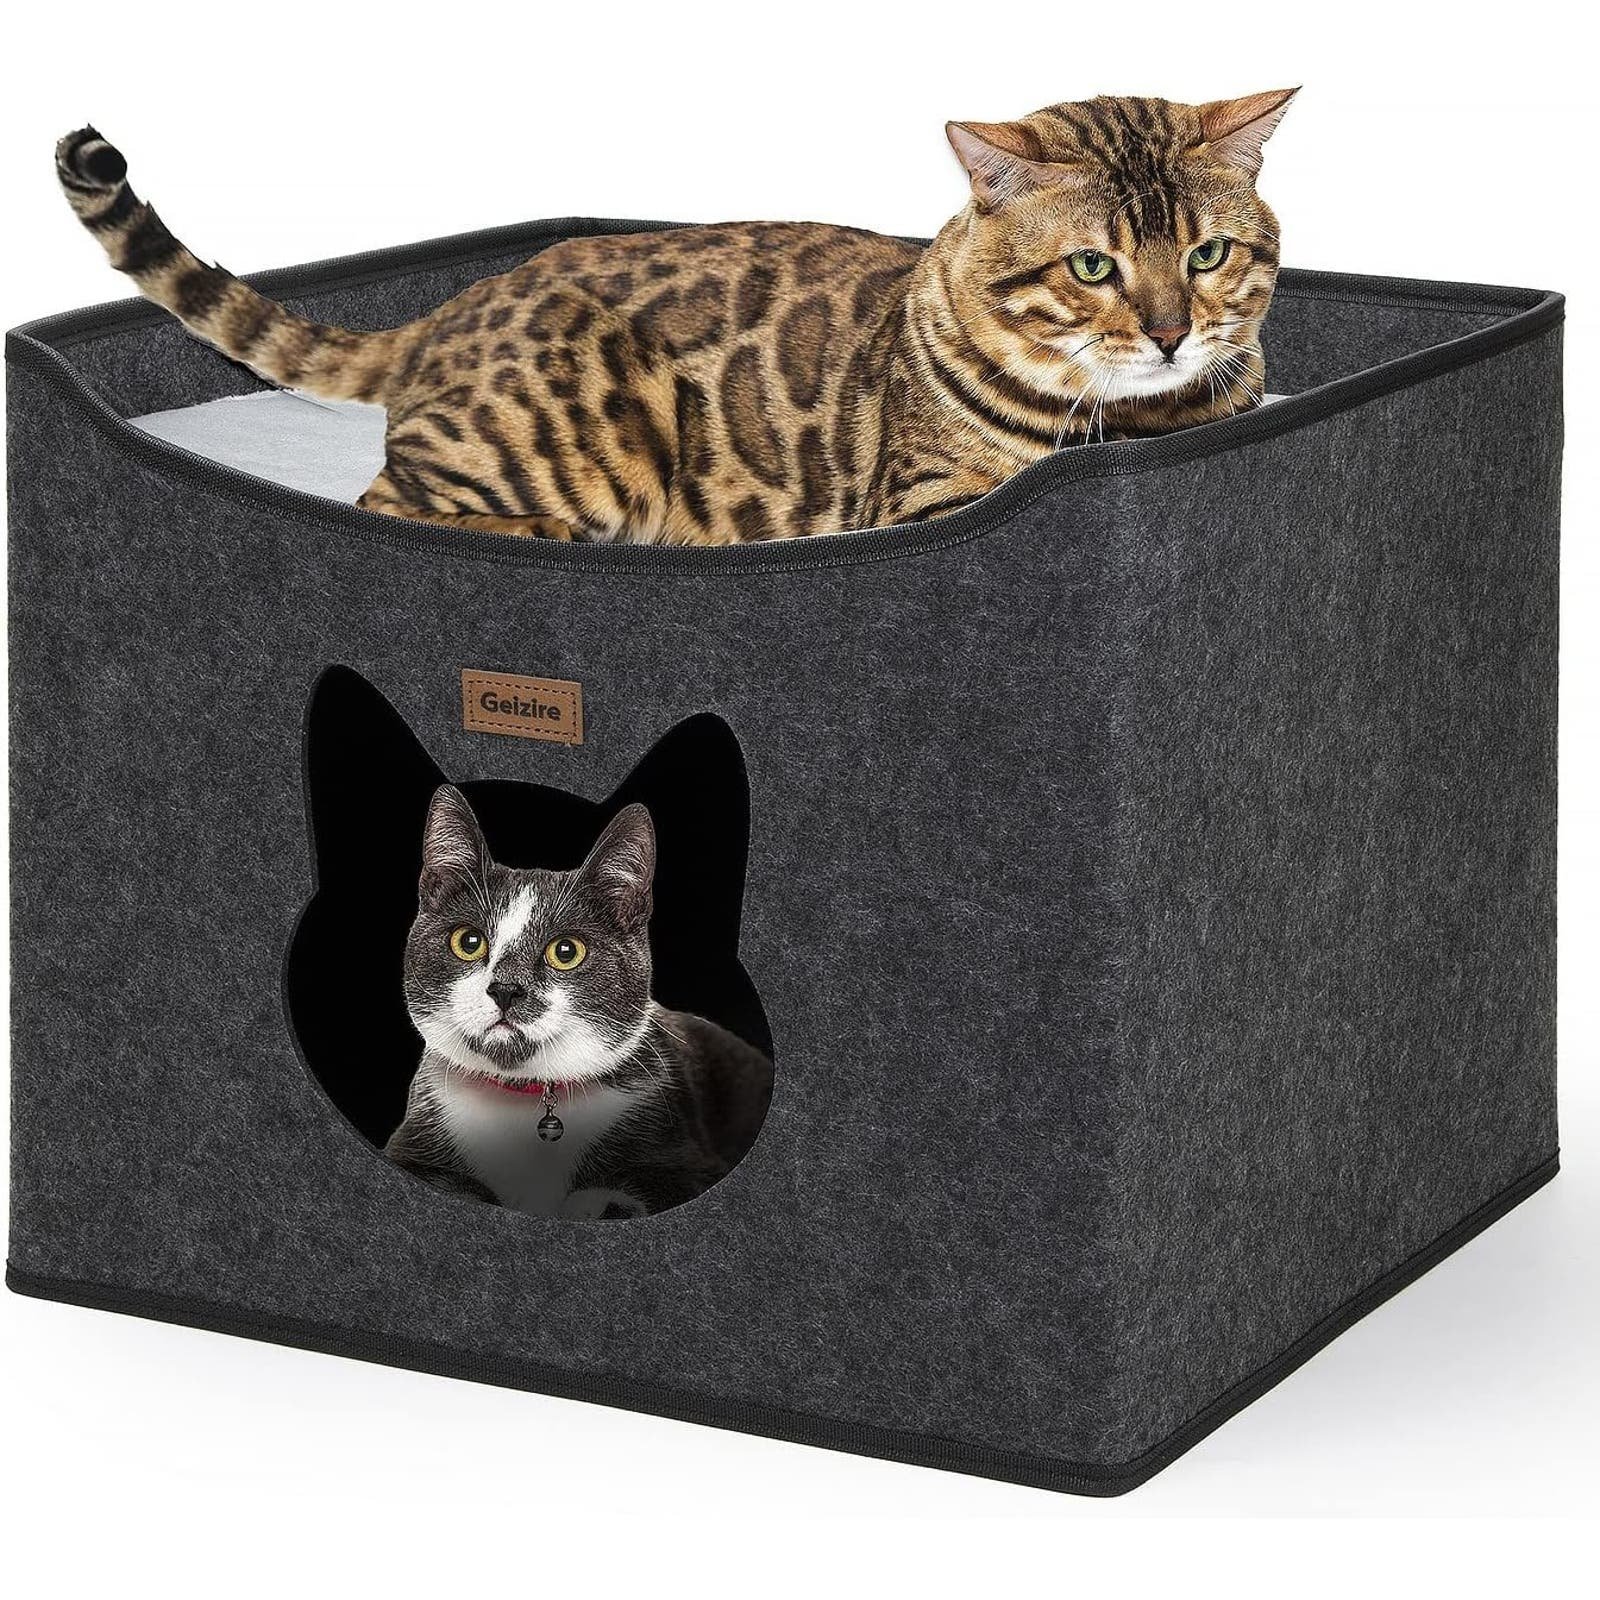 Cat House Cat Beds for Indoor Cats, Large Cat Hideaway with Cute Interesting Ope EF6IMR0dz